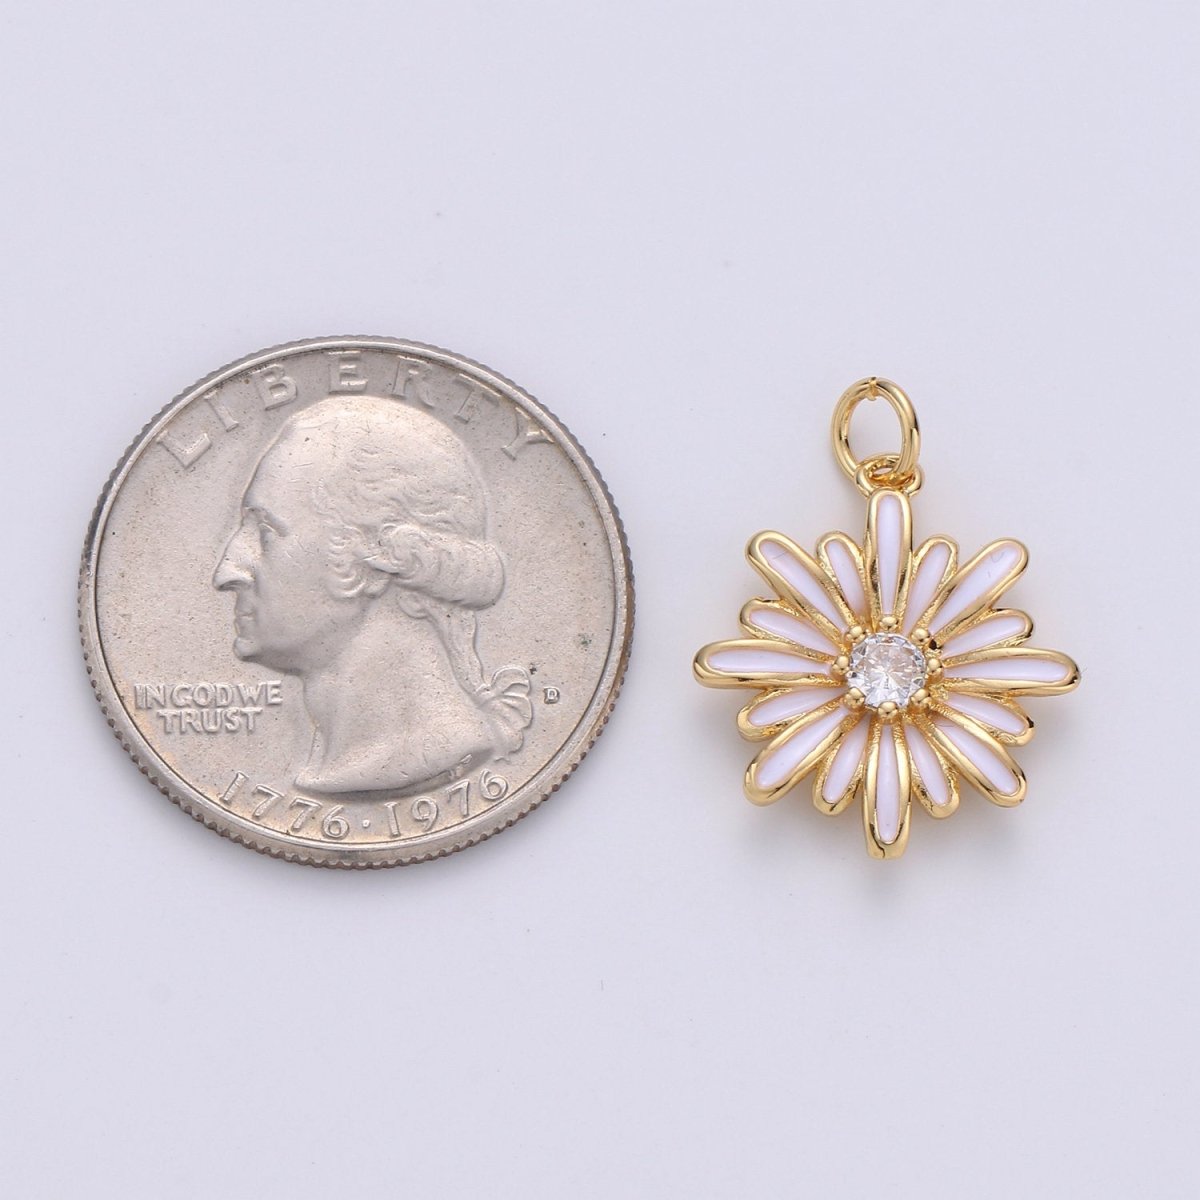 Dainty White daisy charm in Gold / Silver Plated for Jewelry Making Supply D-270 D-271 - DLUXCA